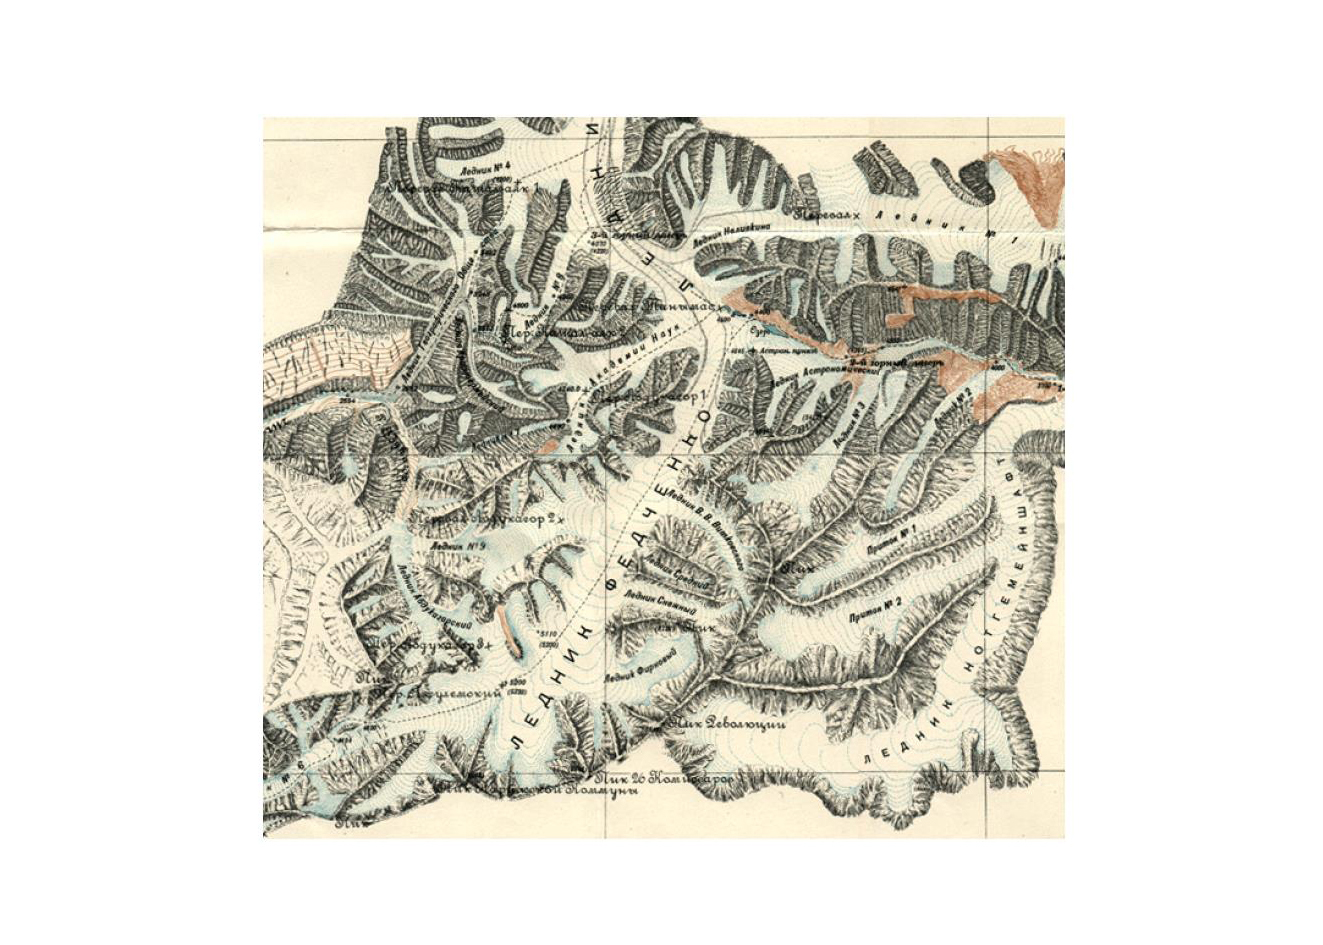 The Notgemeinschaft Glacier (R) on a Russian map from 1928